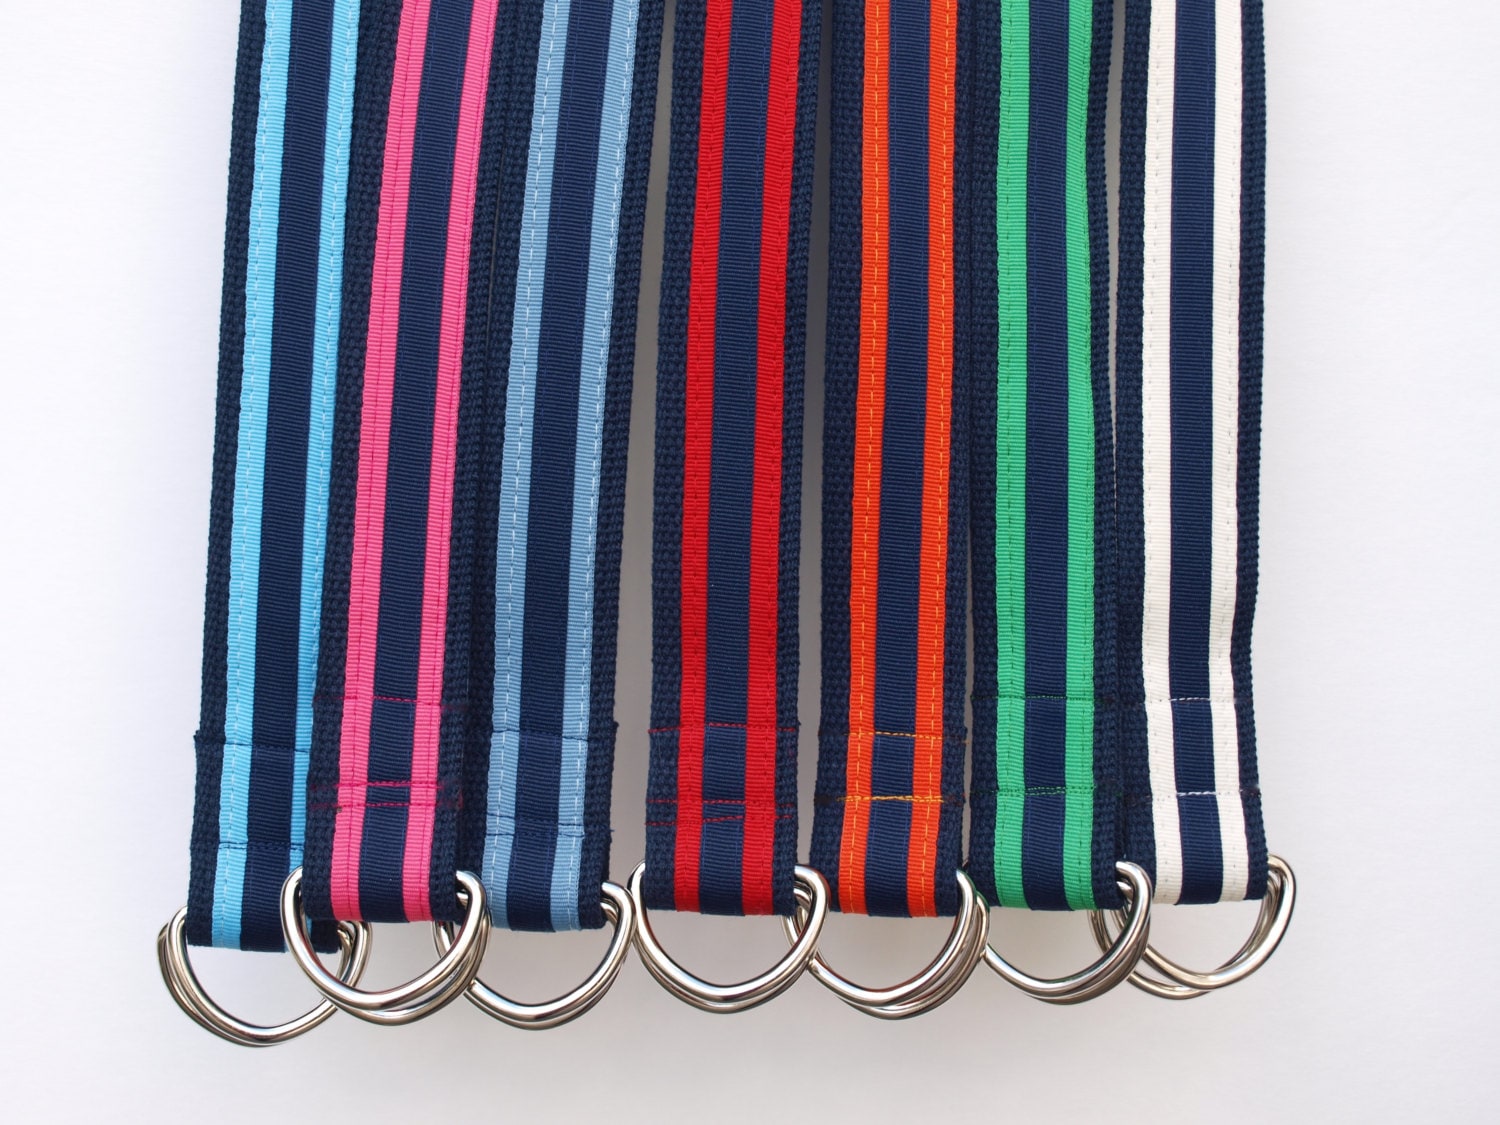 Striped Belts for YOUNGER Boys / Collegiate Stripes / Canvas - Etsy